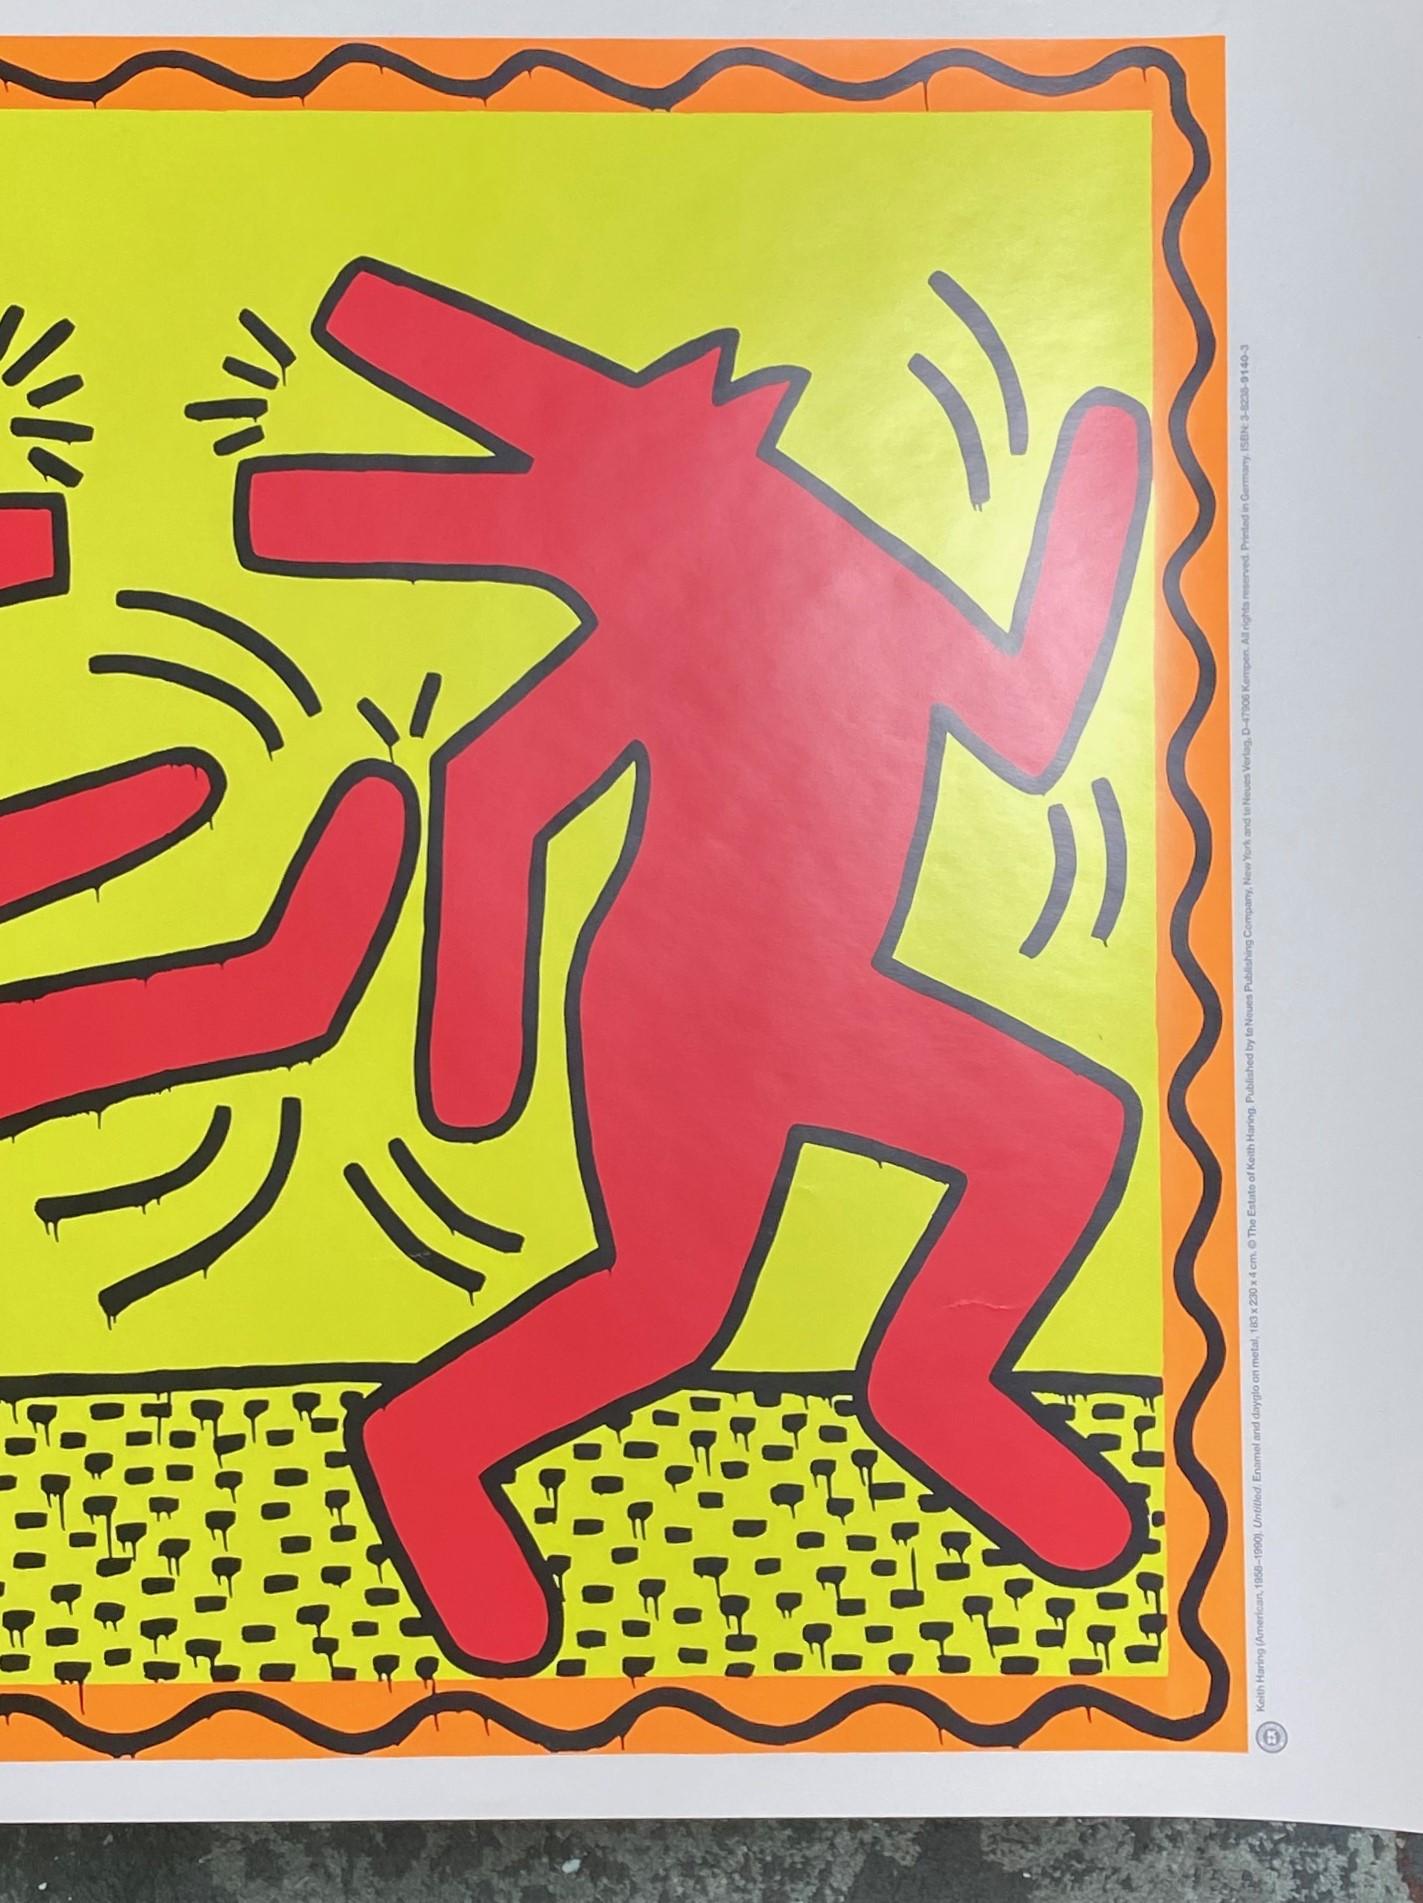 Modern Keith Haring Vintage NYC Pop Shop Art Lithograph Poster Dancing Dogs Wolves 1991 For Sale